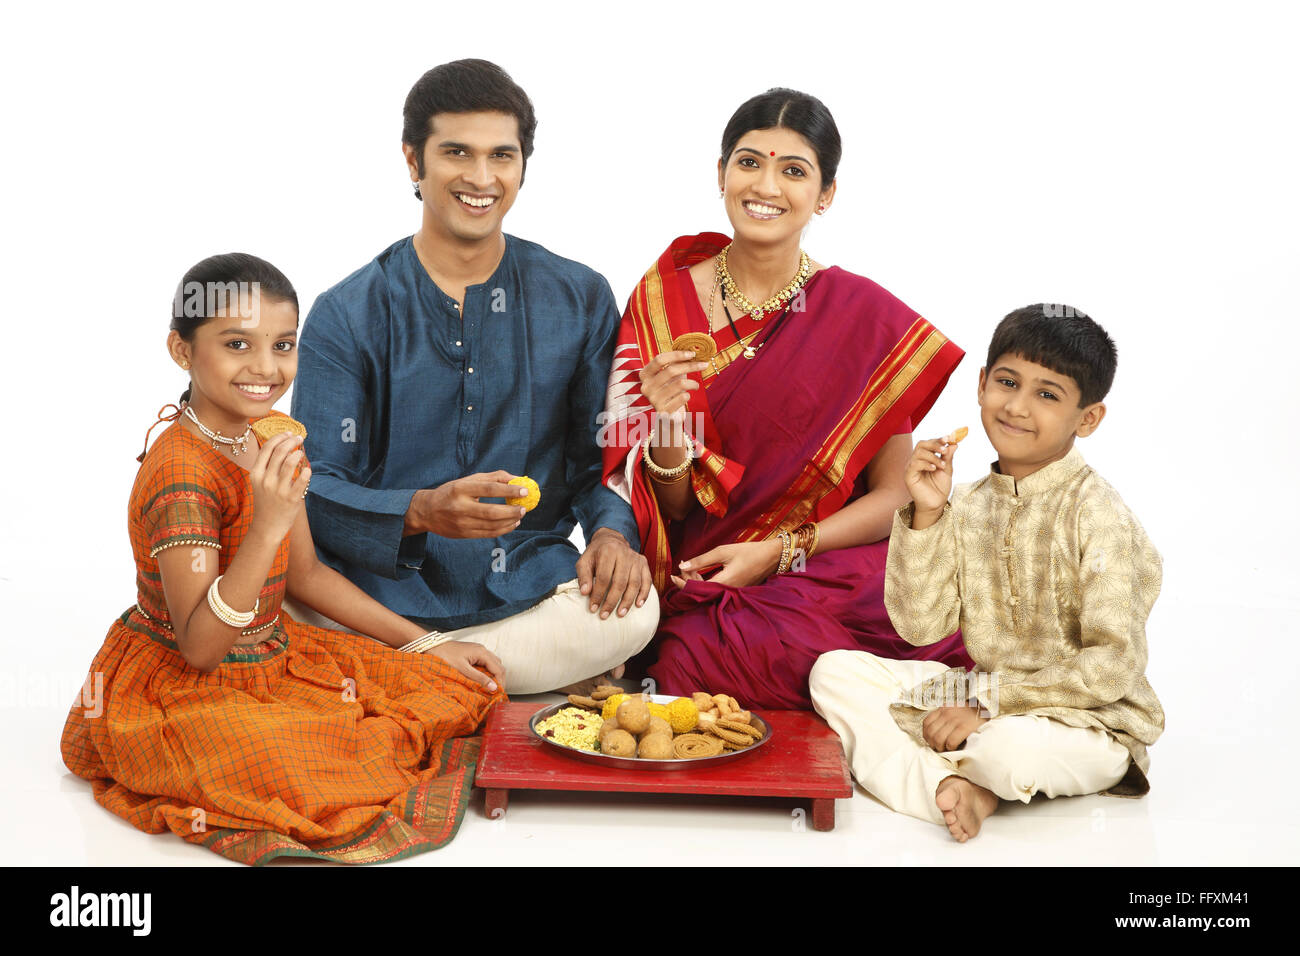 Rich rural farmer family sitting together with snacks kept in plate on wooden seat MR#743A,743B,743C,743D Stock Photo